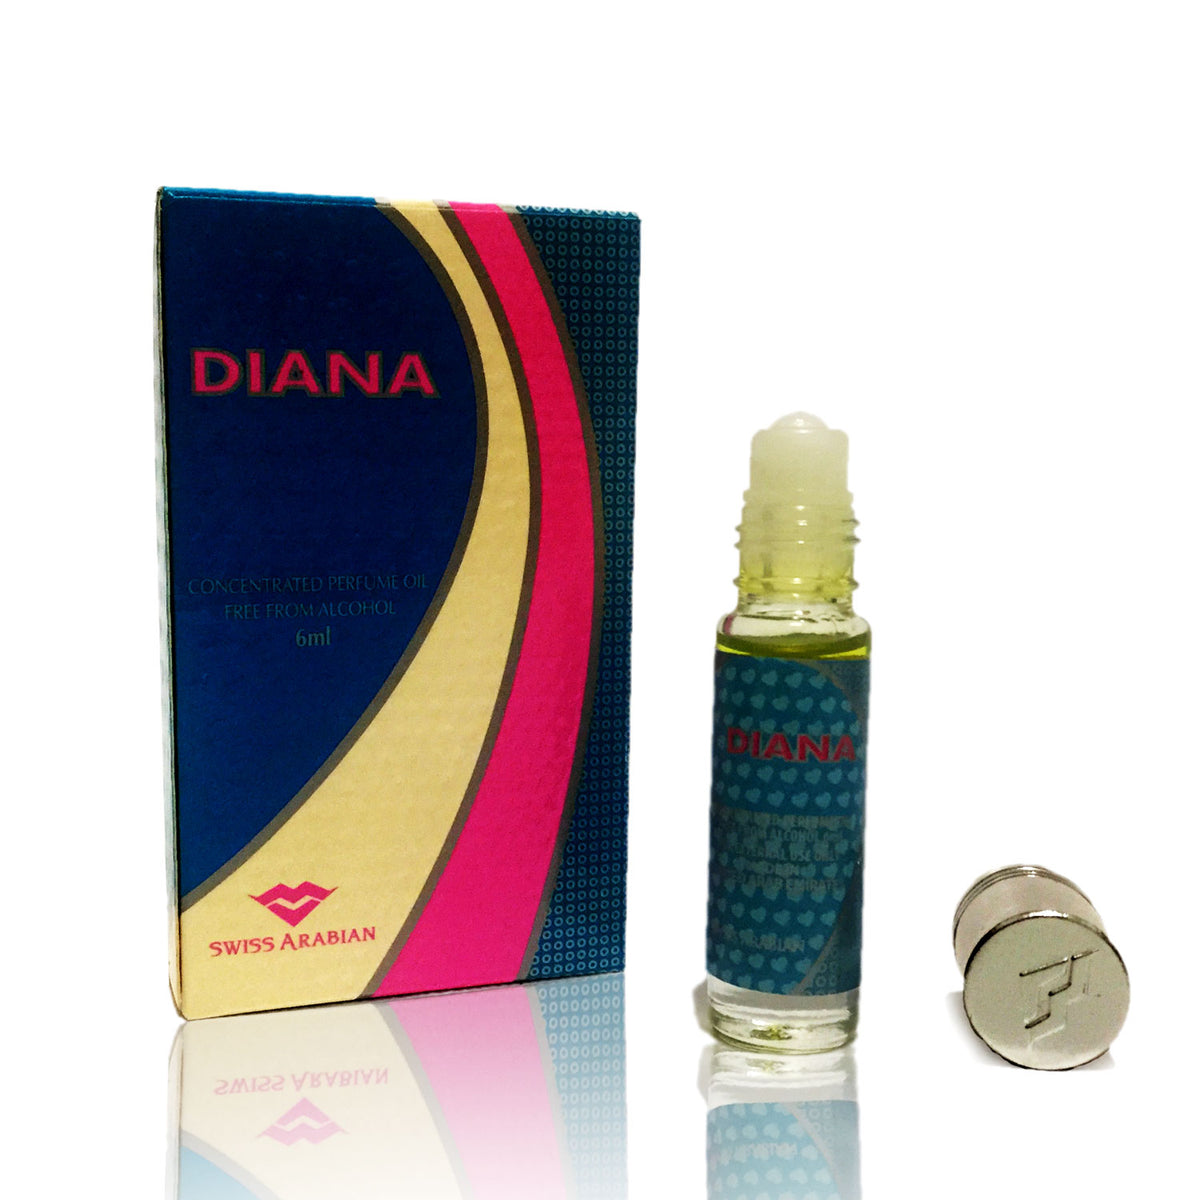 DIANA, Roll On Perfume Oil 6 mL (.2 oz) | Floral, Woody, Spicy